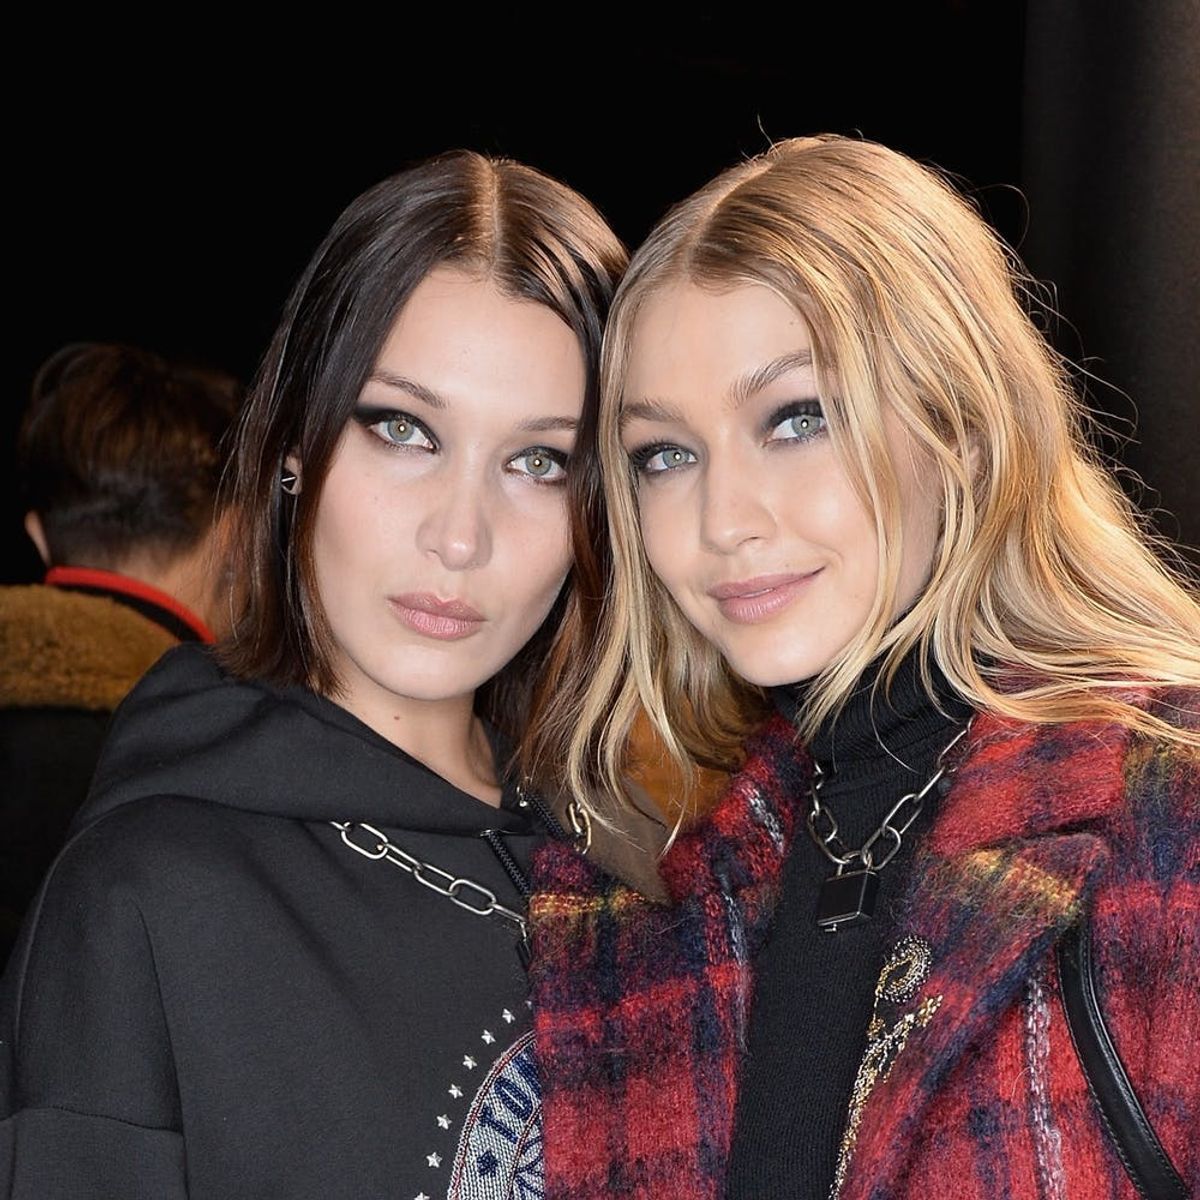 Gigi and Bella Hadid Just Posed Totally Nude for ‘British Vogue’ Together